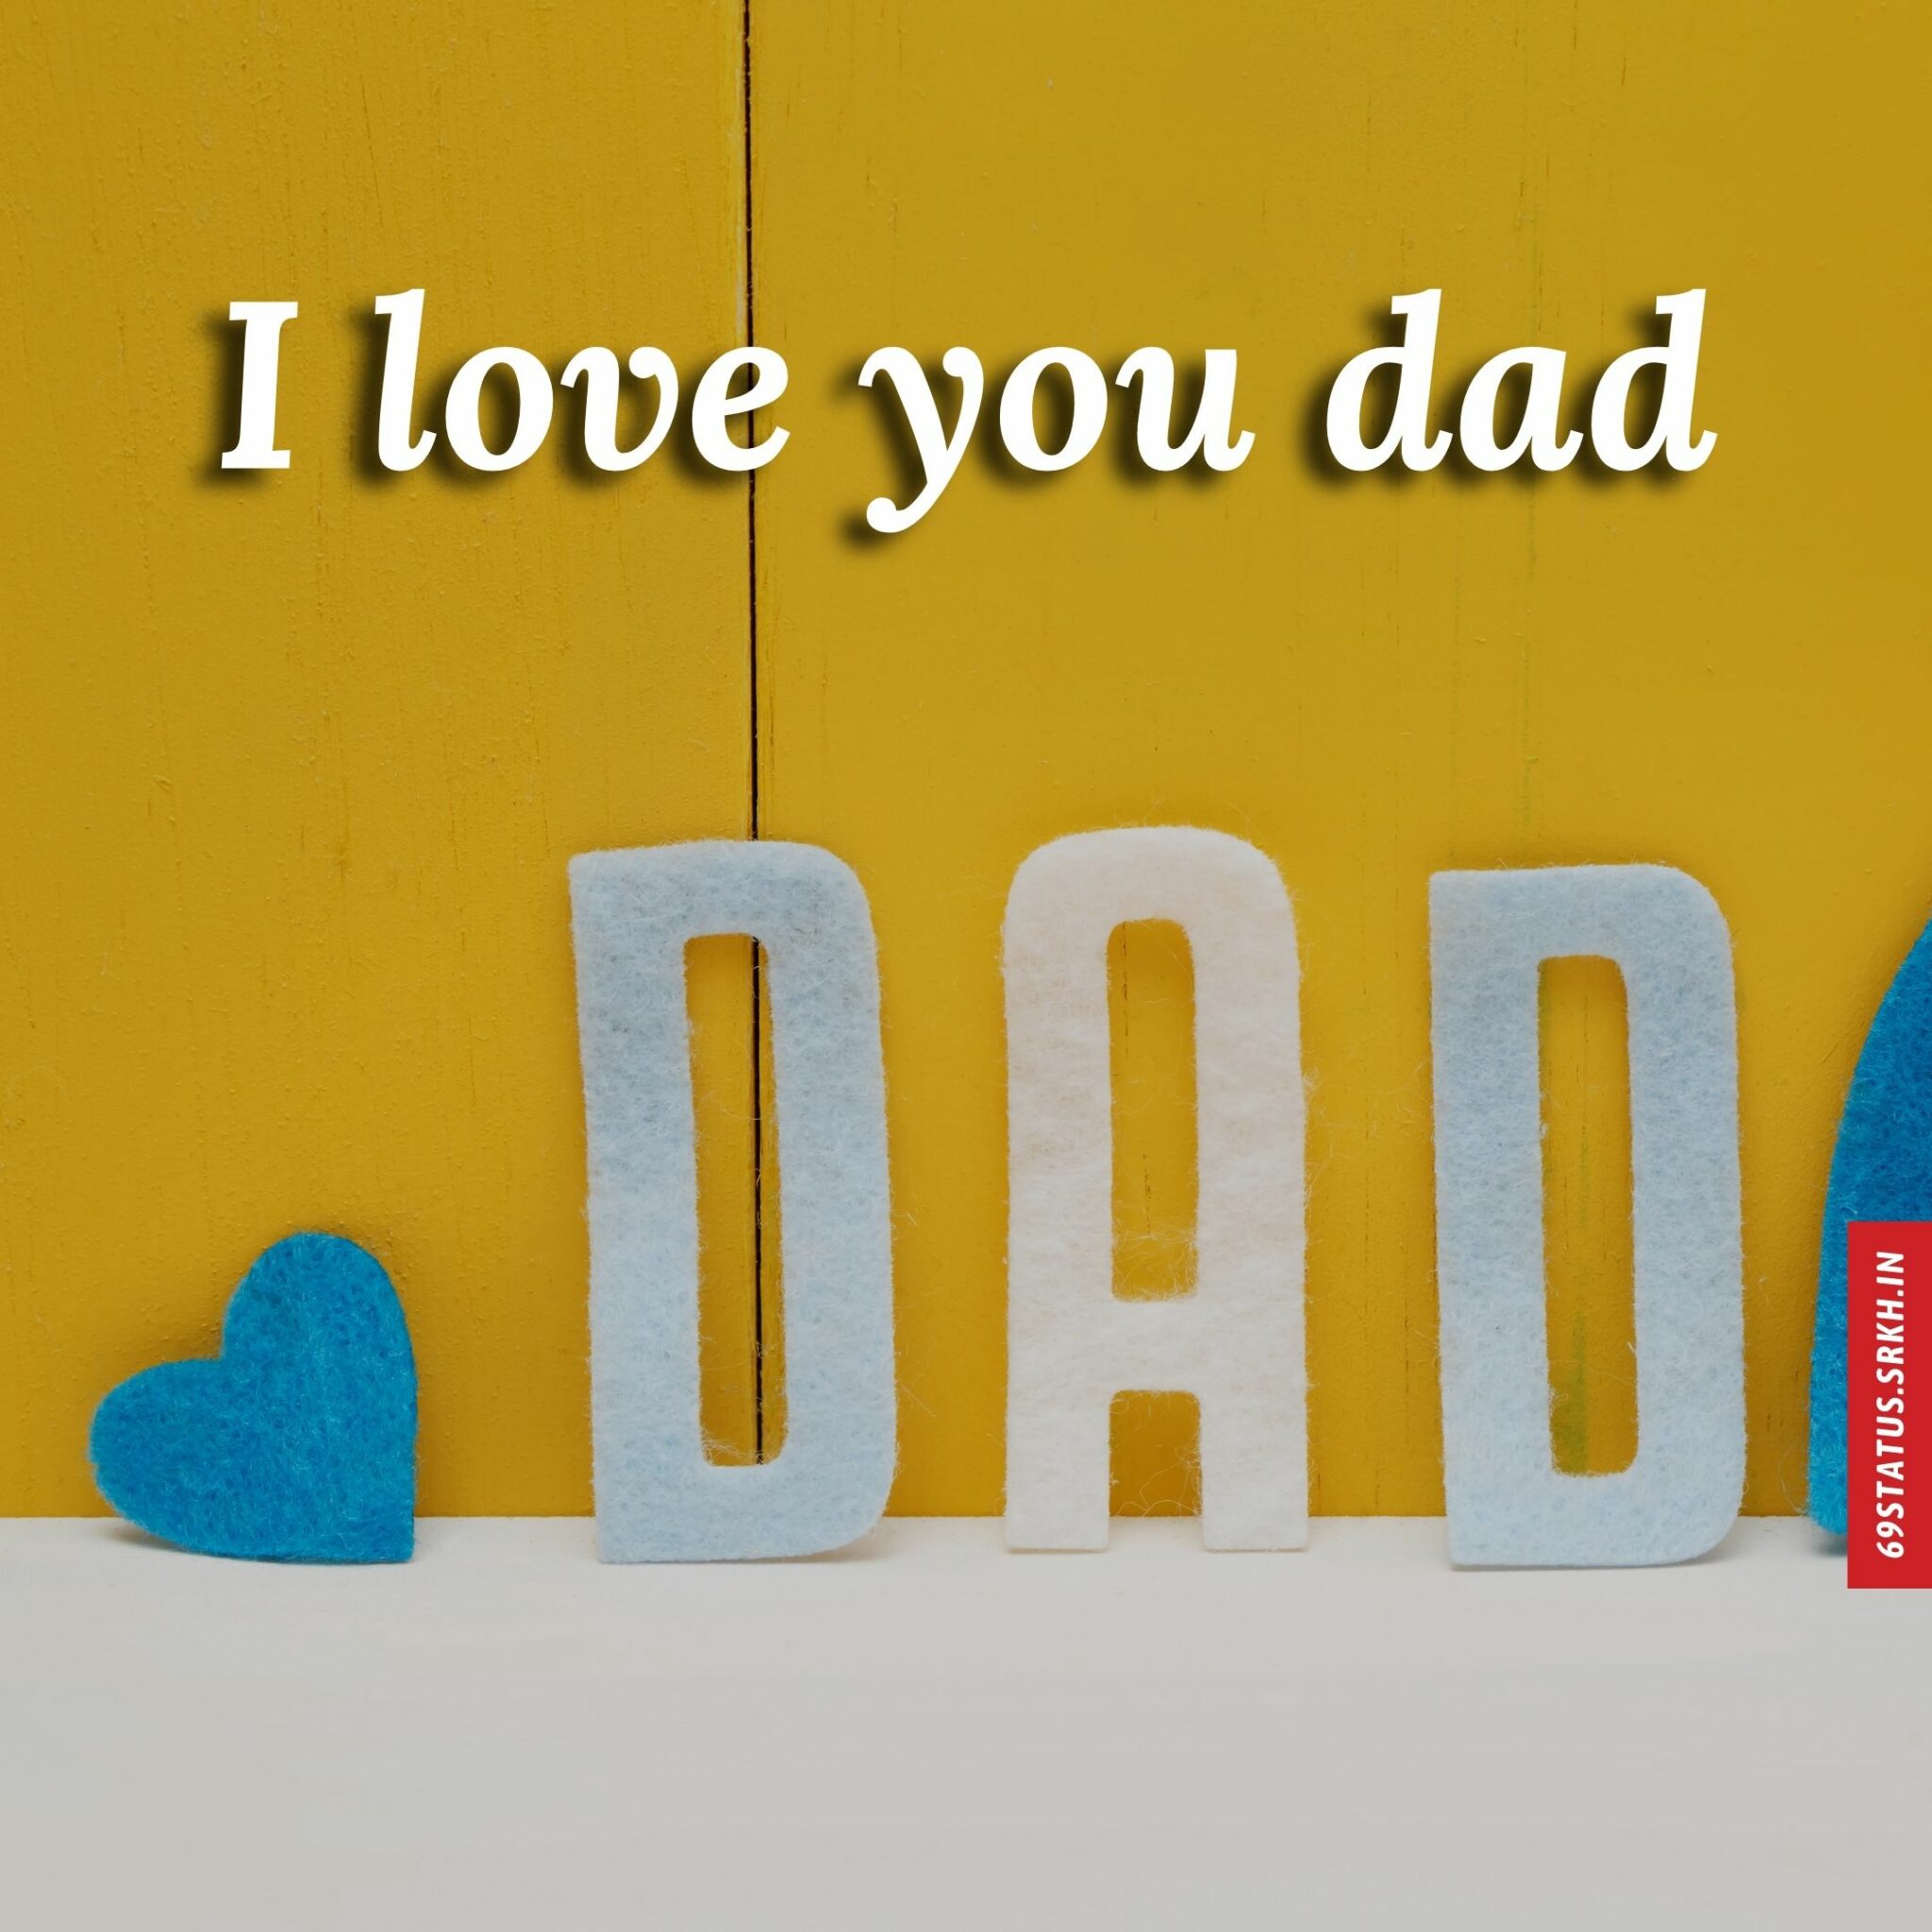 I Love You dad images hd